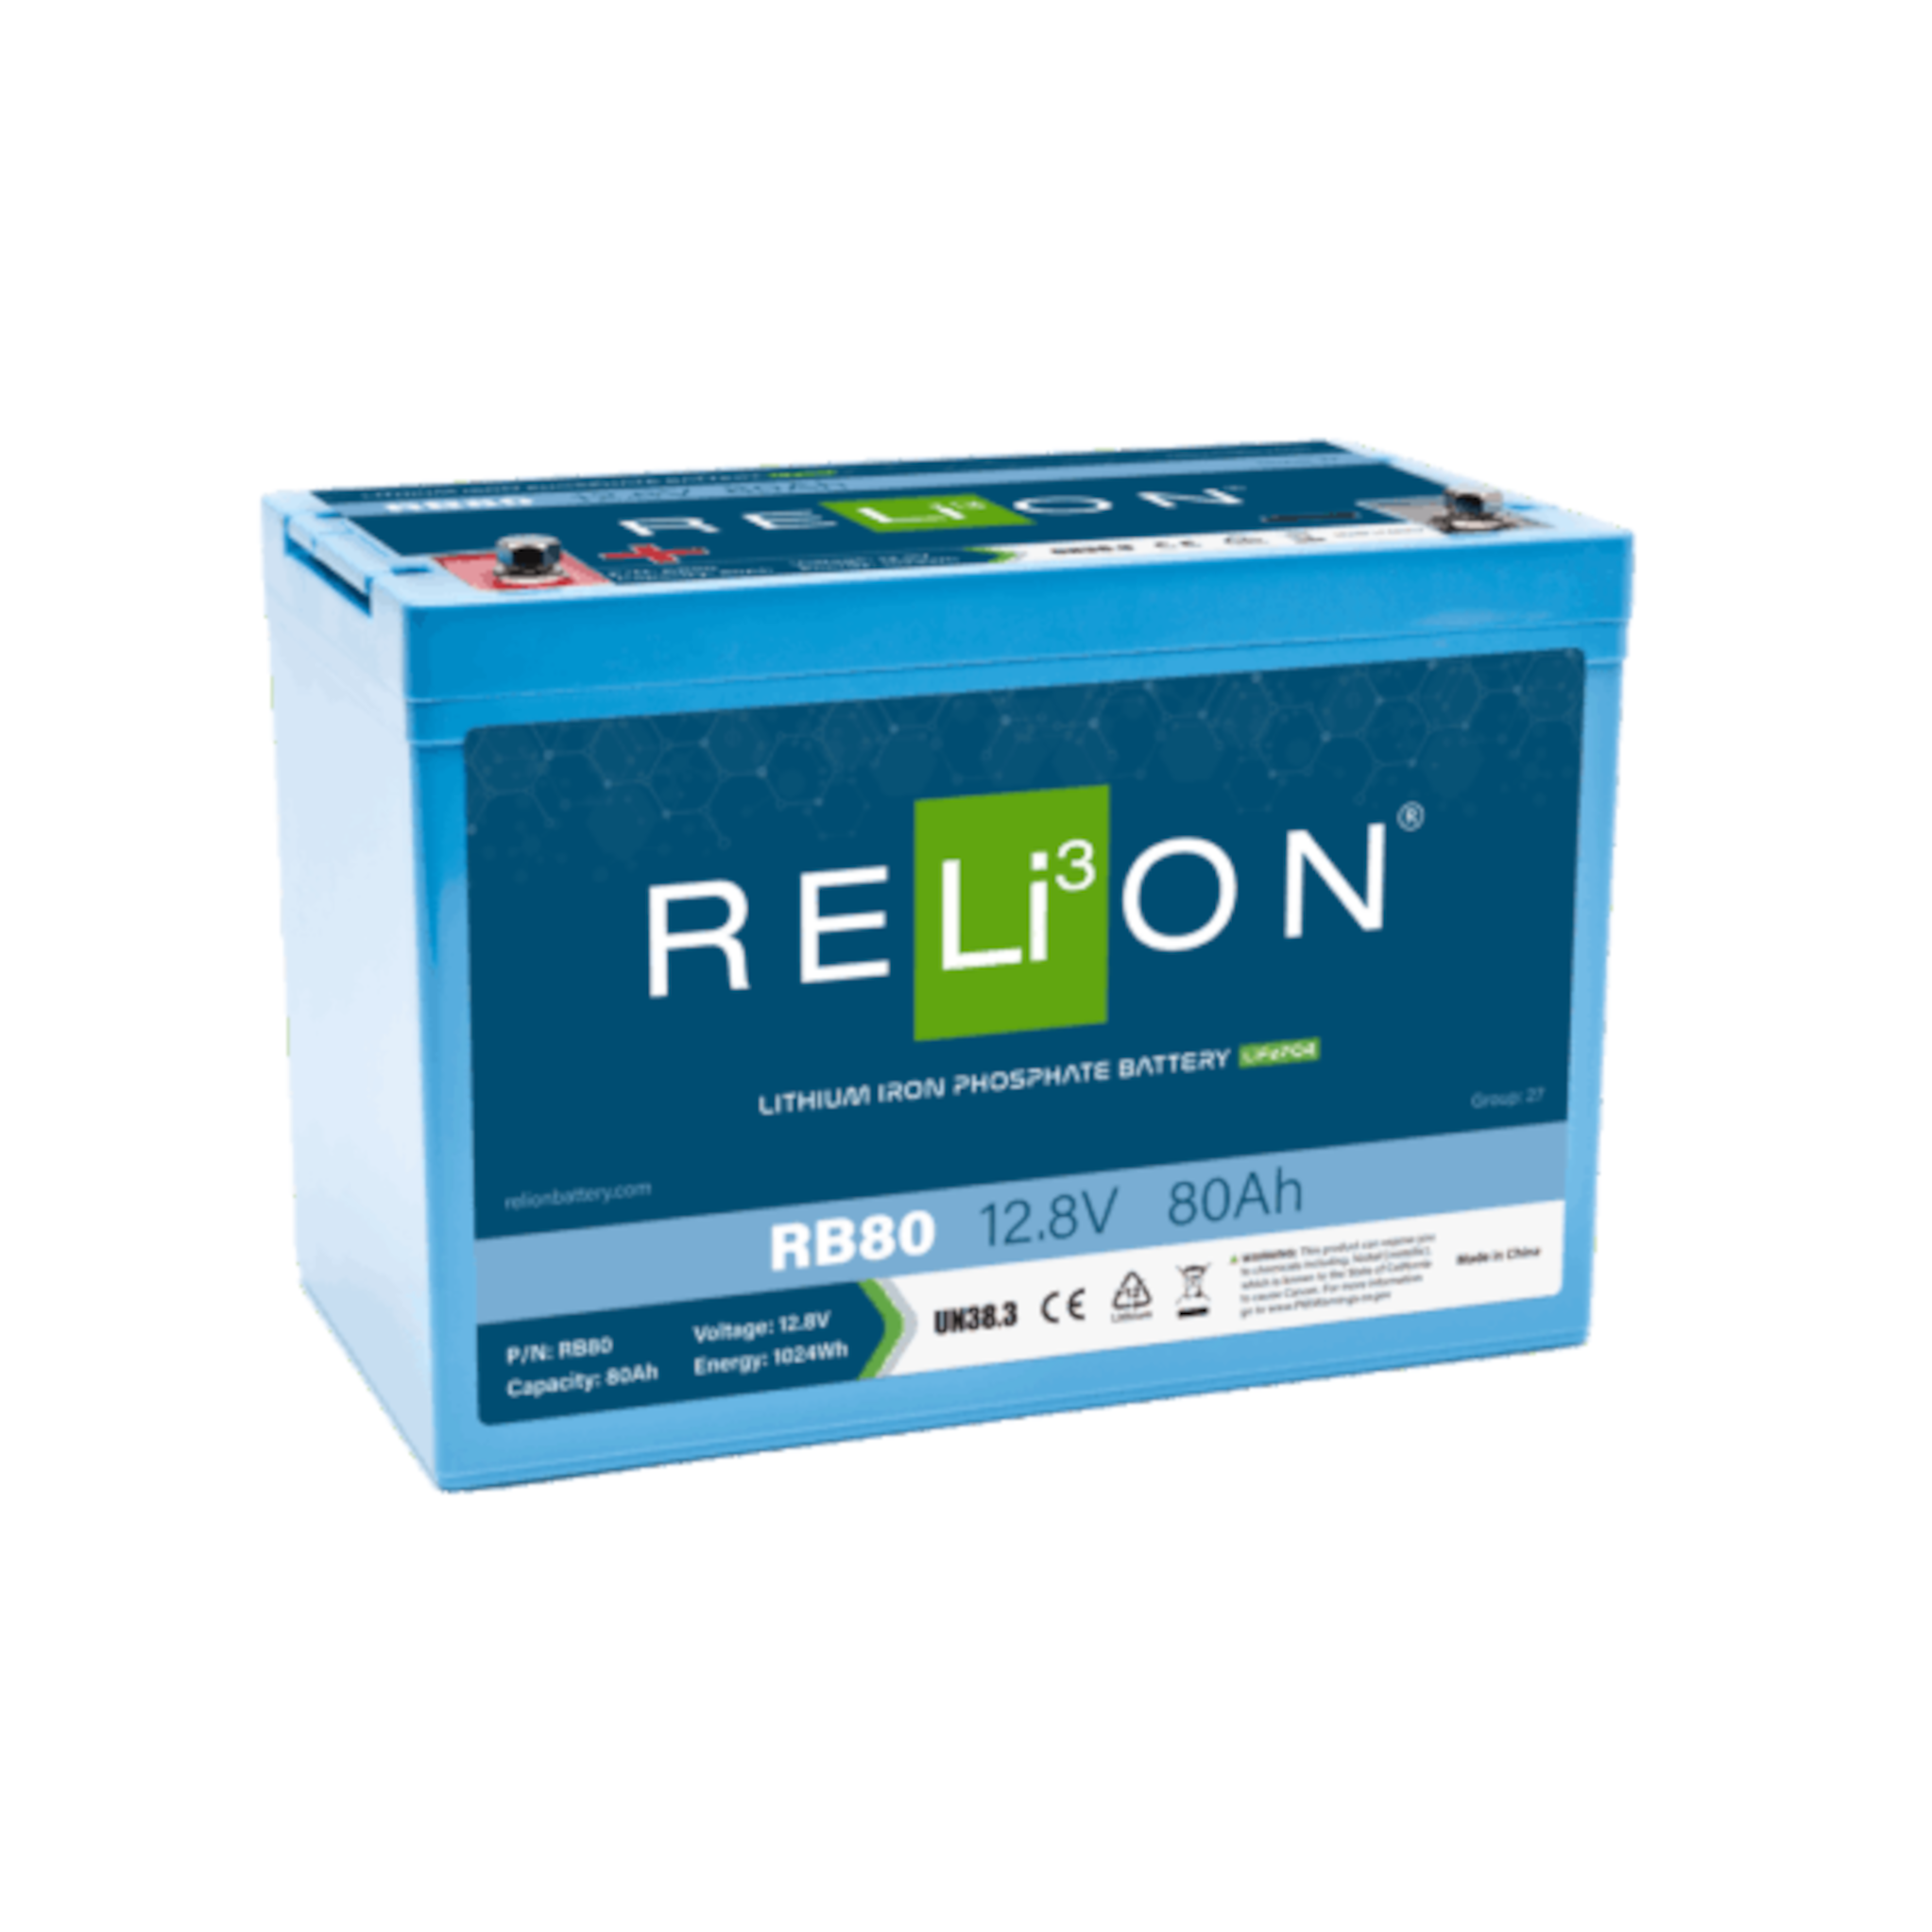 Relion RB80 12V LiFePO4 Lithium Deep Cycle Battery